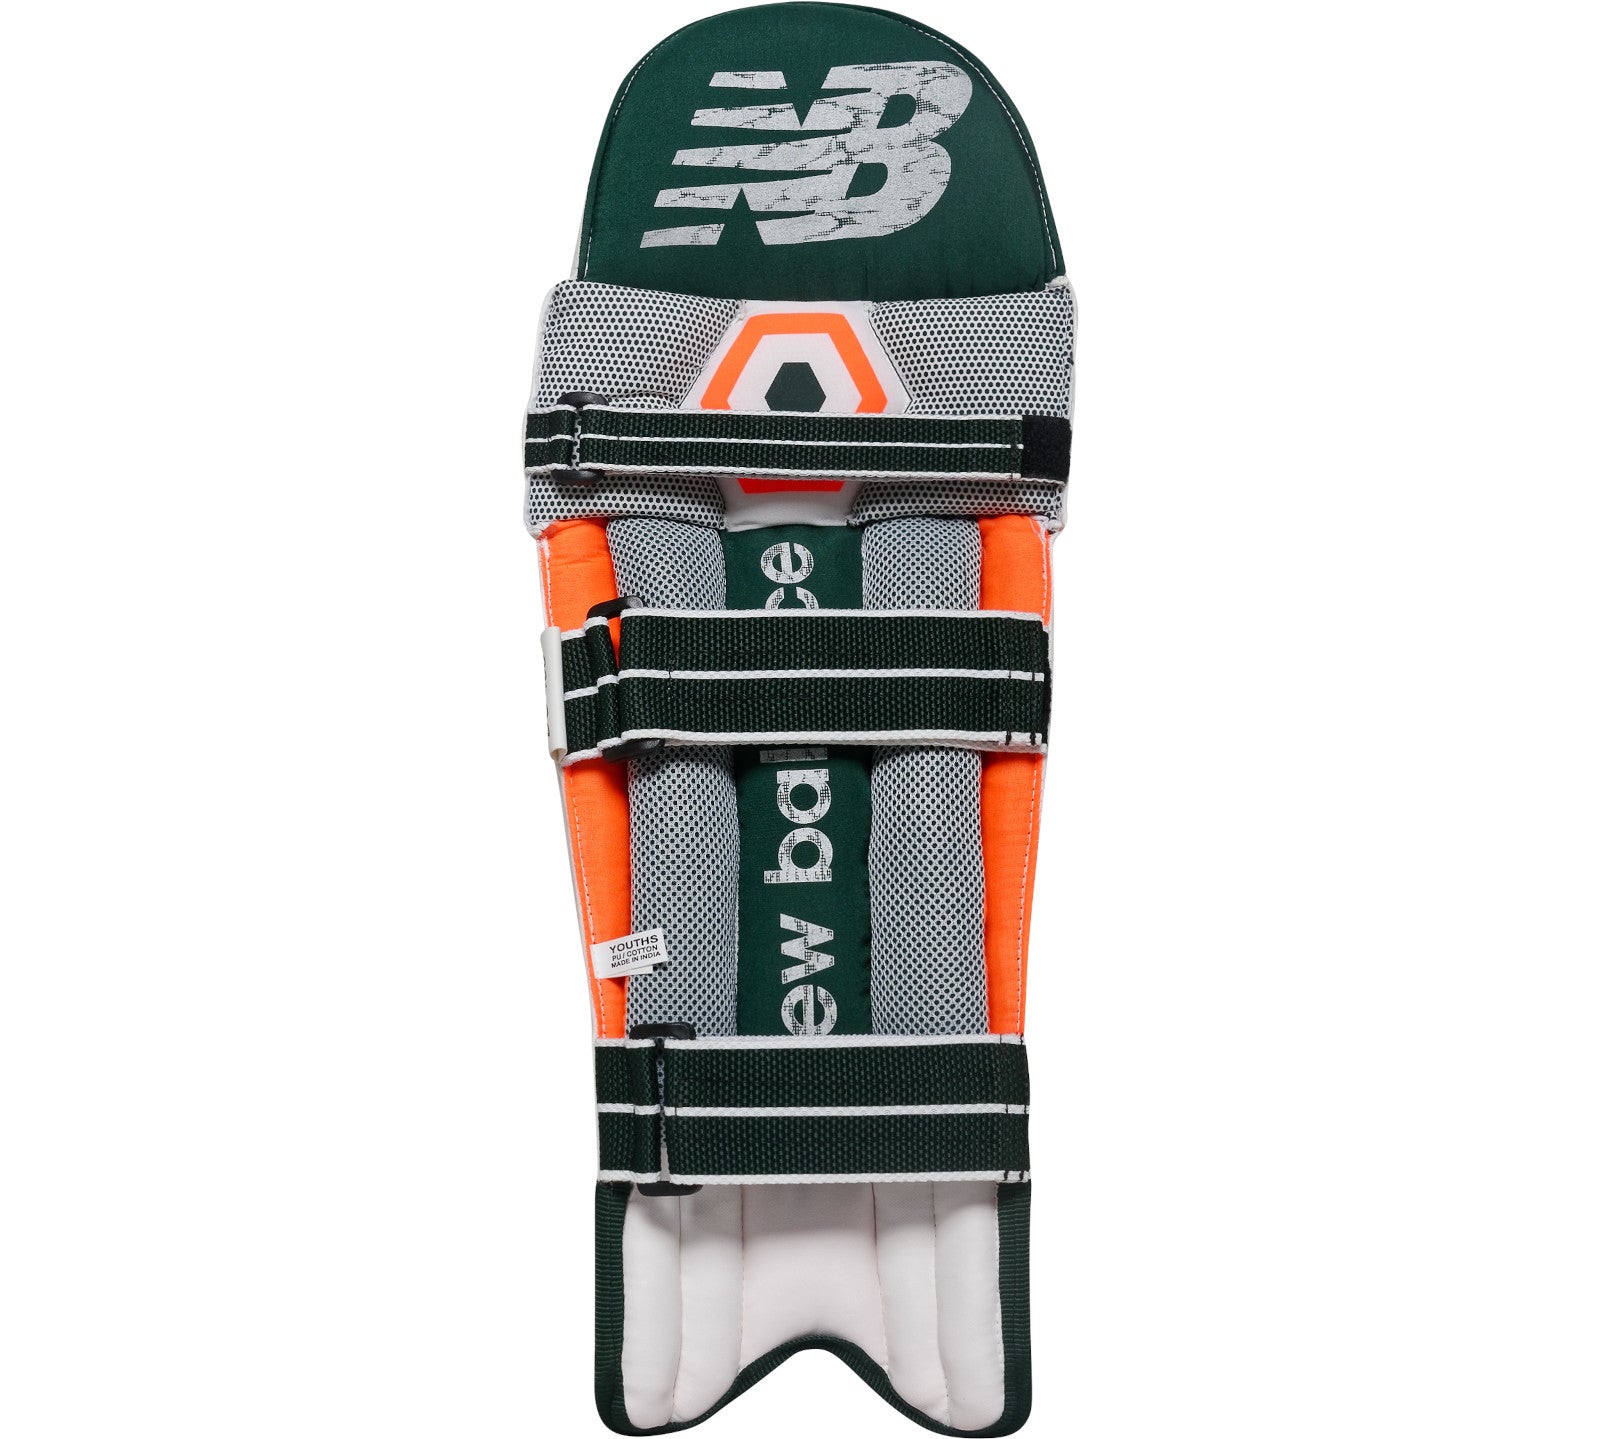 New Balance DC 380 Cricket Batting Pads Buy it Stagsports Store